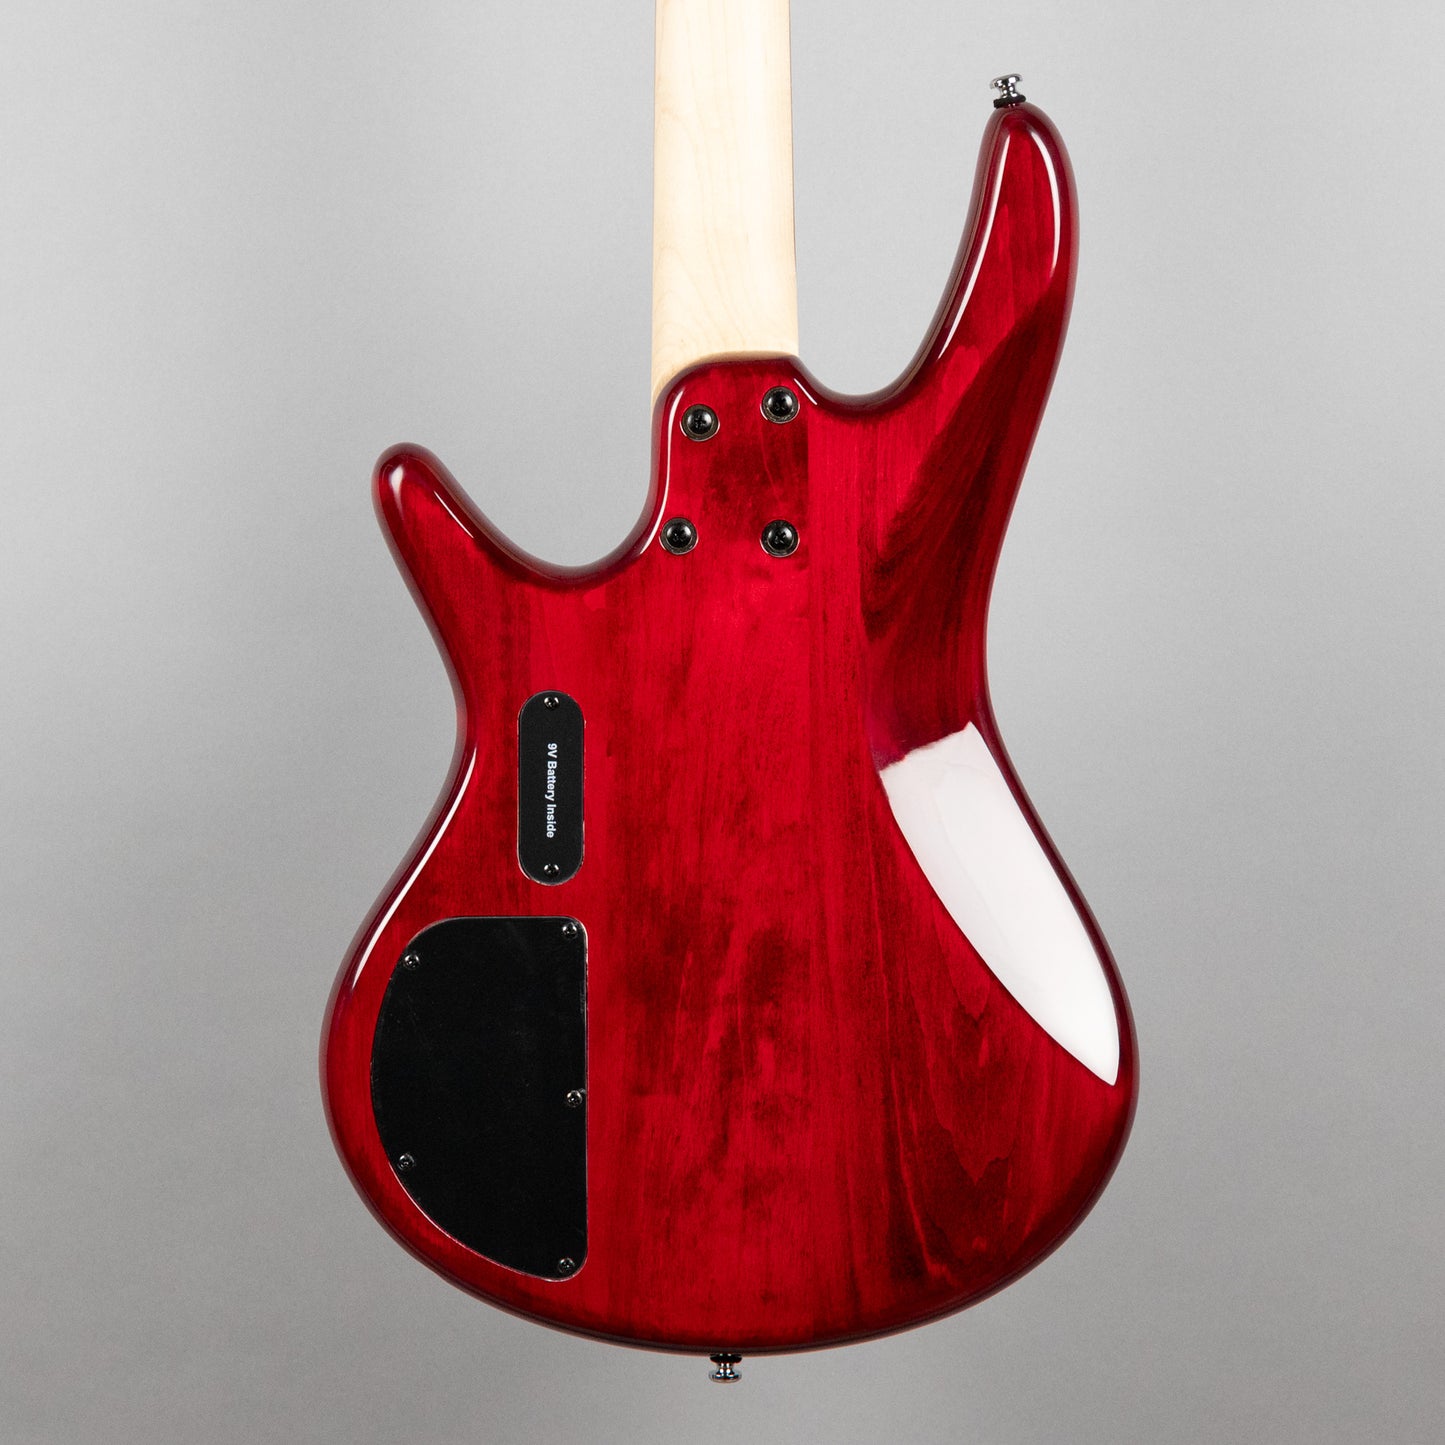 Ibanez GSR200-TR 4-String Bass in Transparent Red